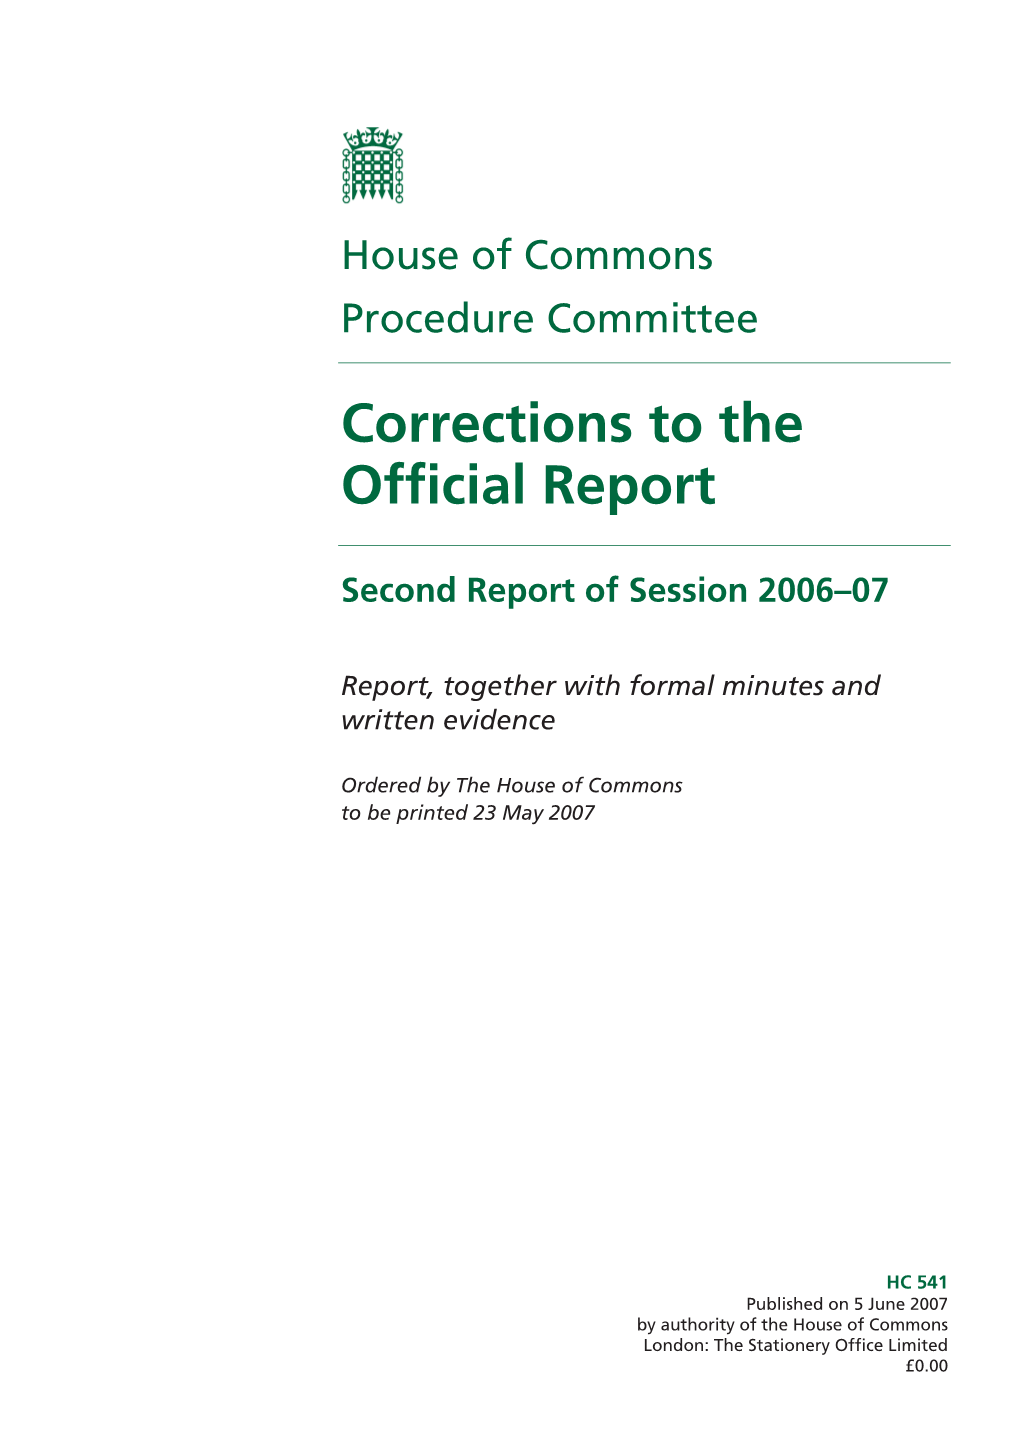 Corrections to the Official Report